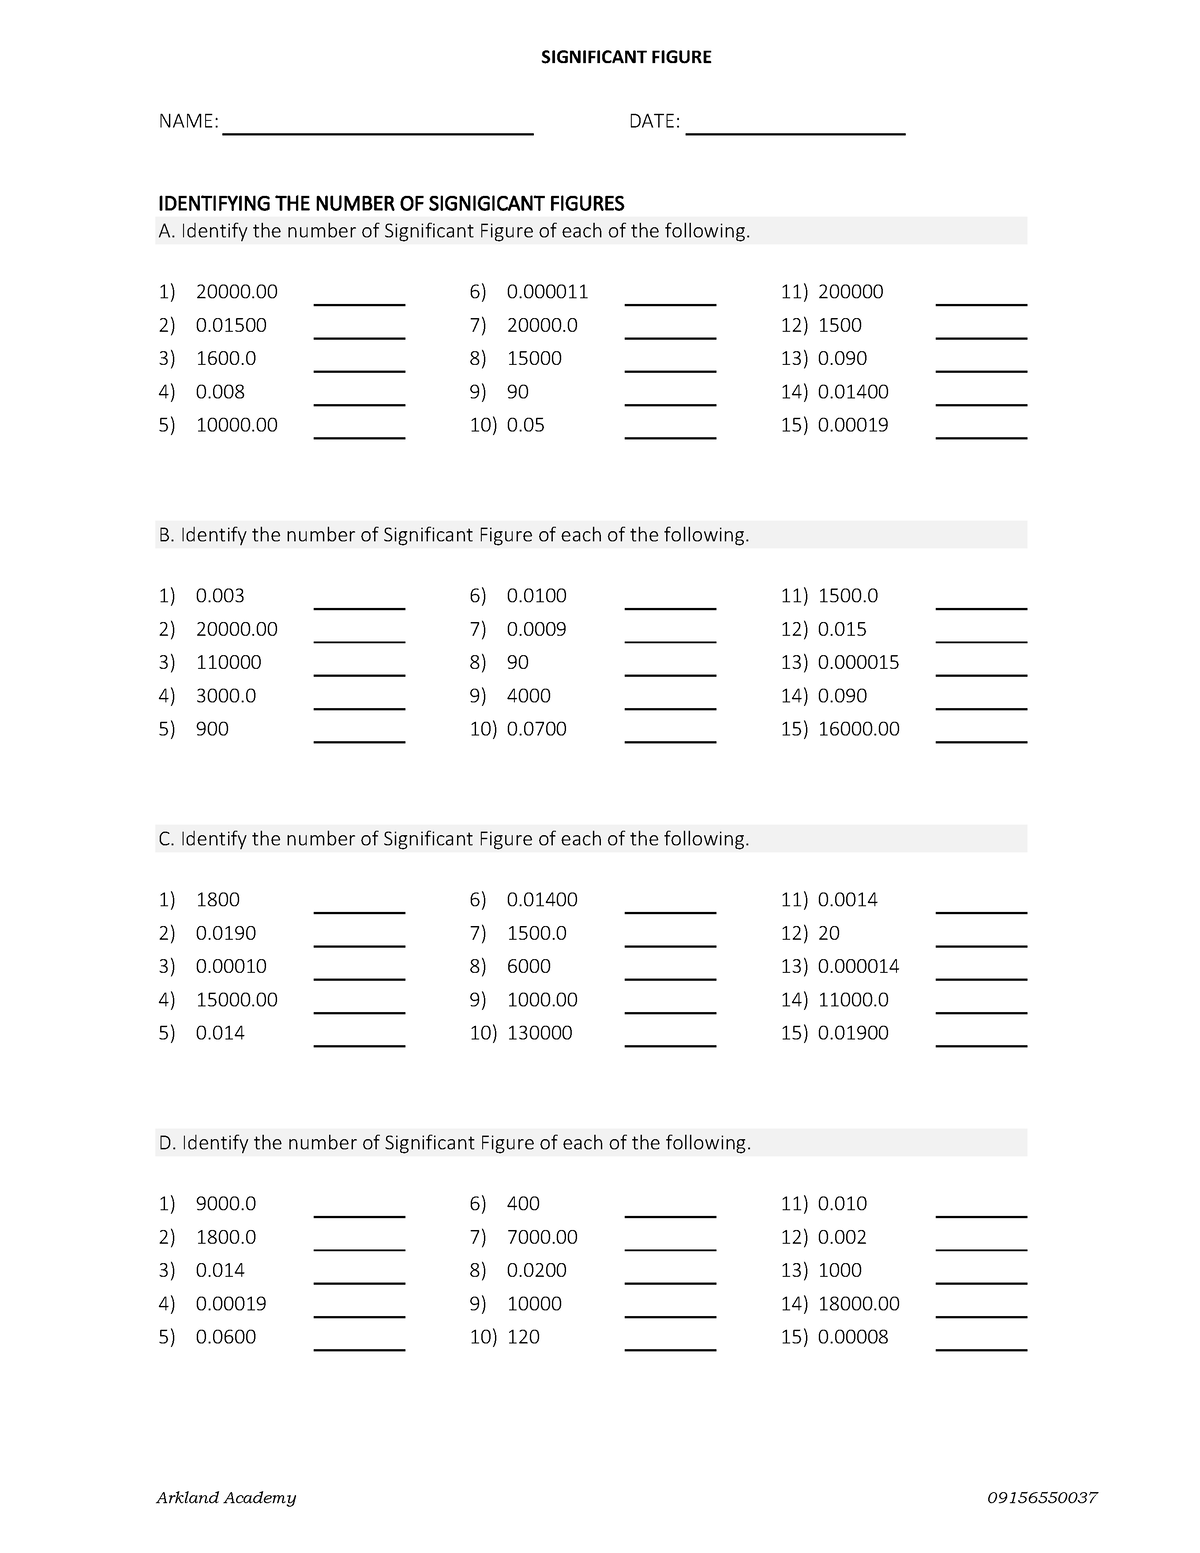 Significant Figures - SIGNIFICANT FIGURE NAME: DATE: IDENTIFYING THE ...